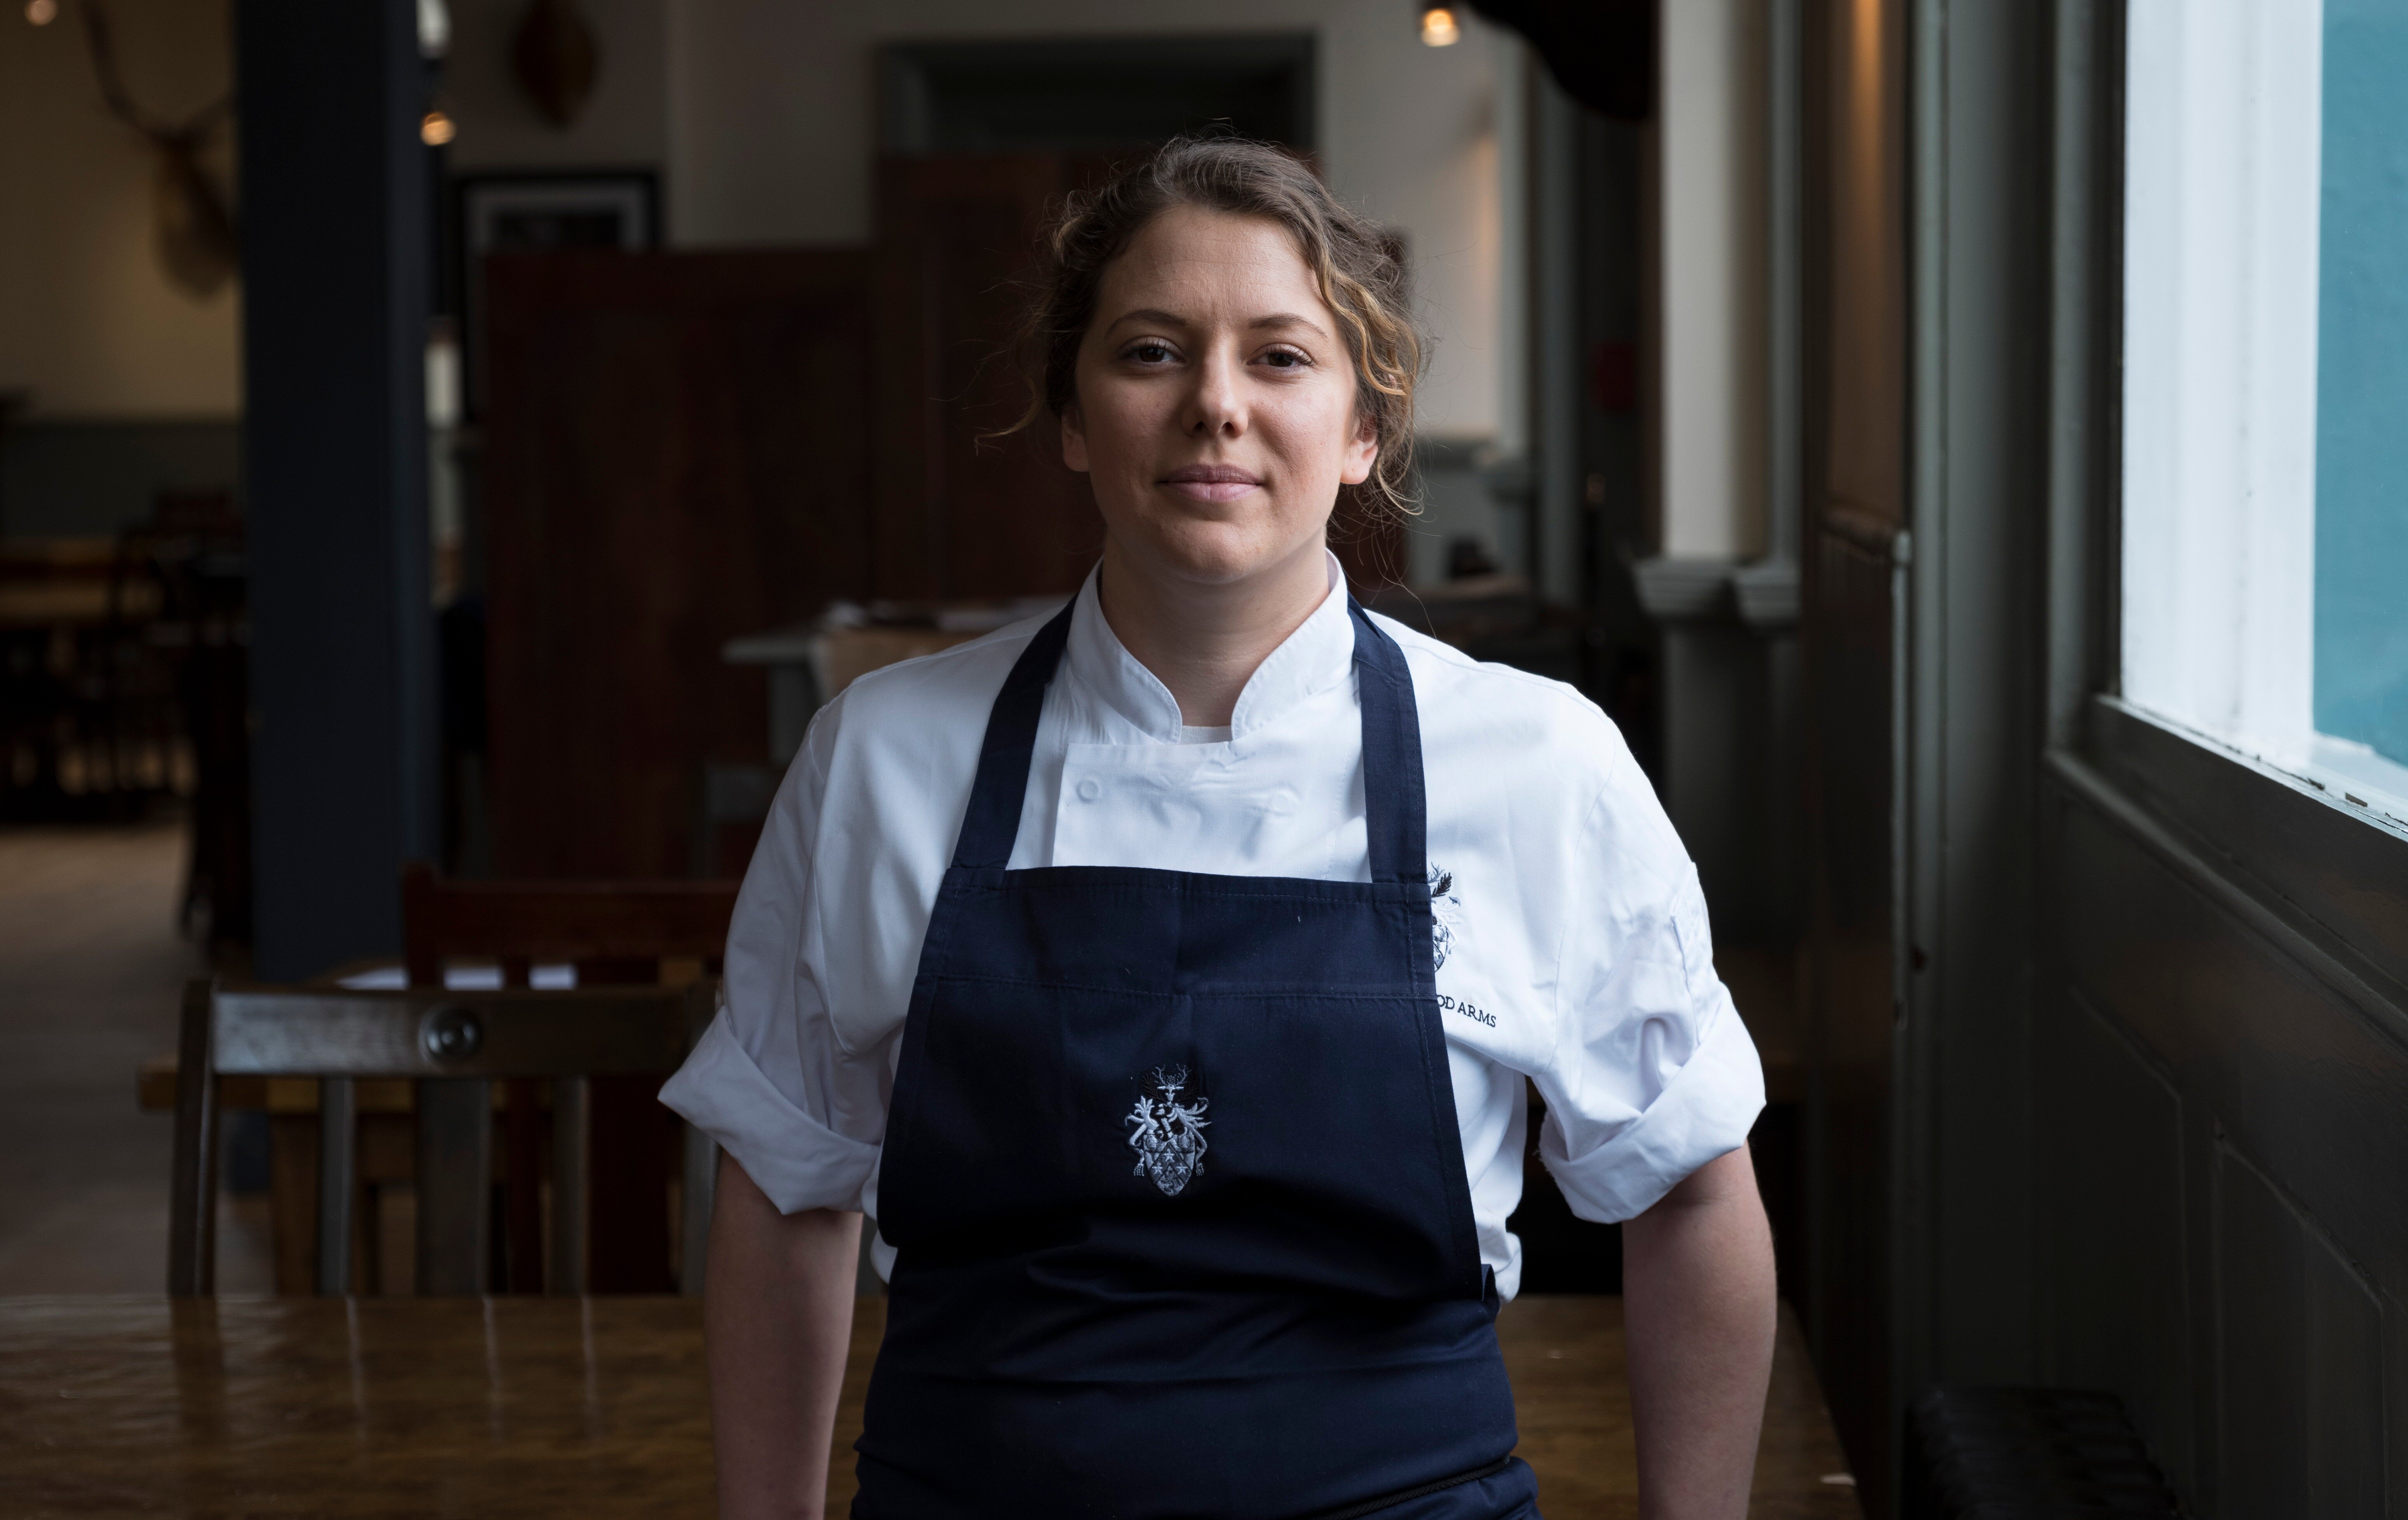 Sally Abé to open the Pem restaurant at Conrad London St James